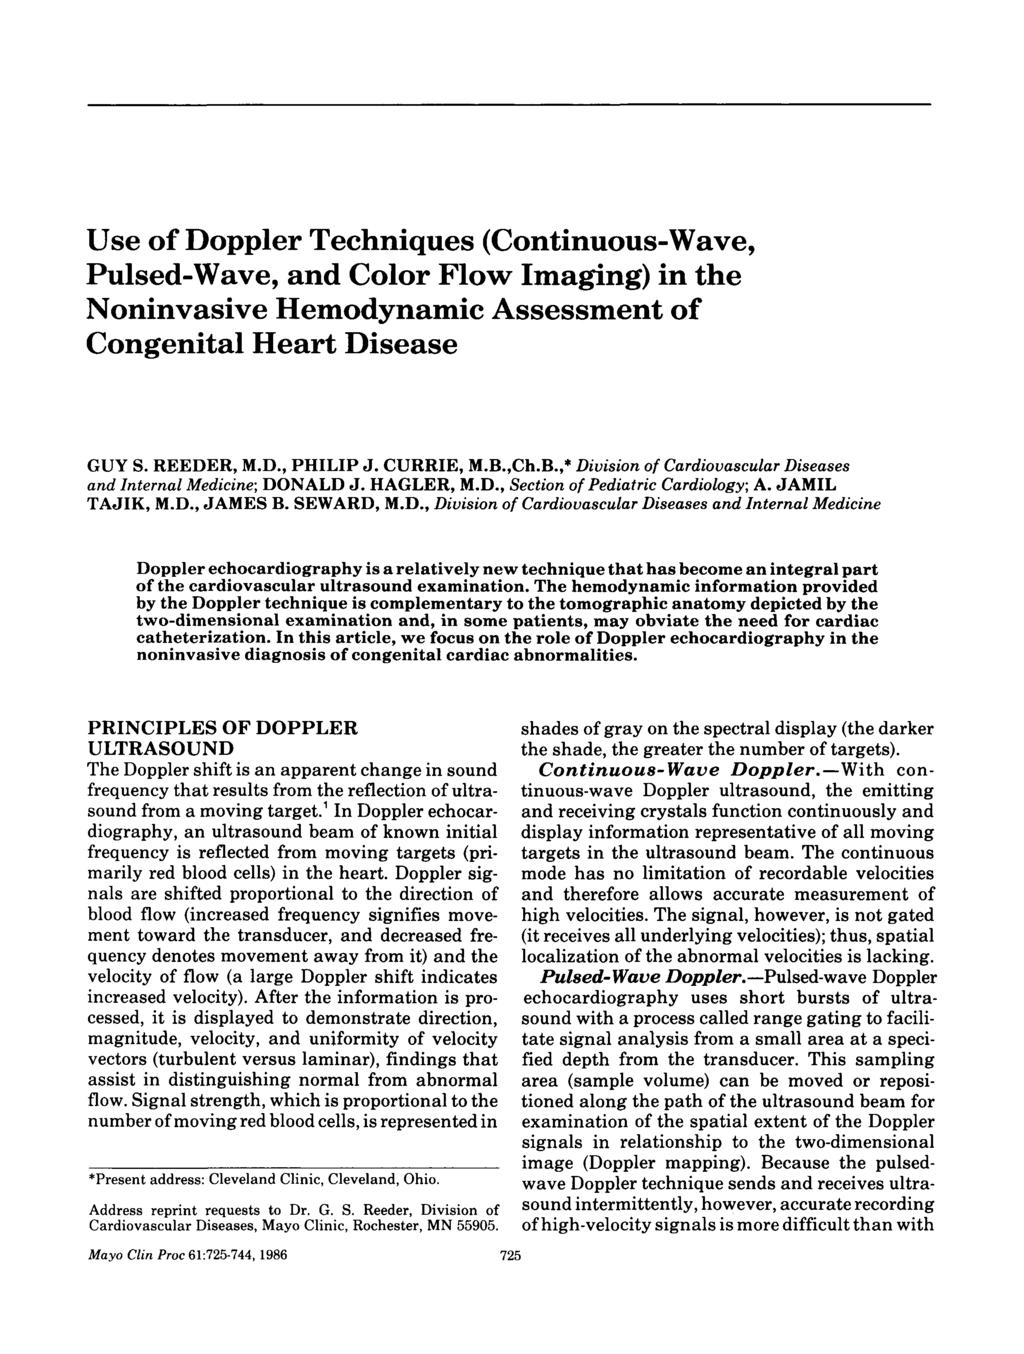 Subject Review Use of Doppler Techniques (Continuous-Wave, Pulsed-Wave, and Color Flow Imaging) in the Noninvasive Hemodynamic Assessment of Congenital Heart Disease GUY S. REEDER, M.D., PHILIP J.